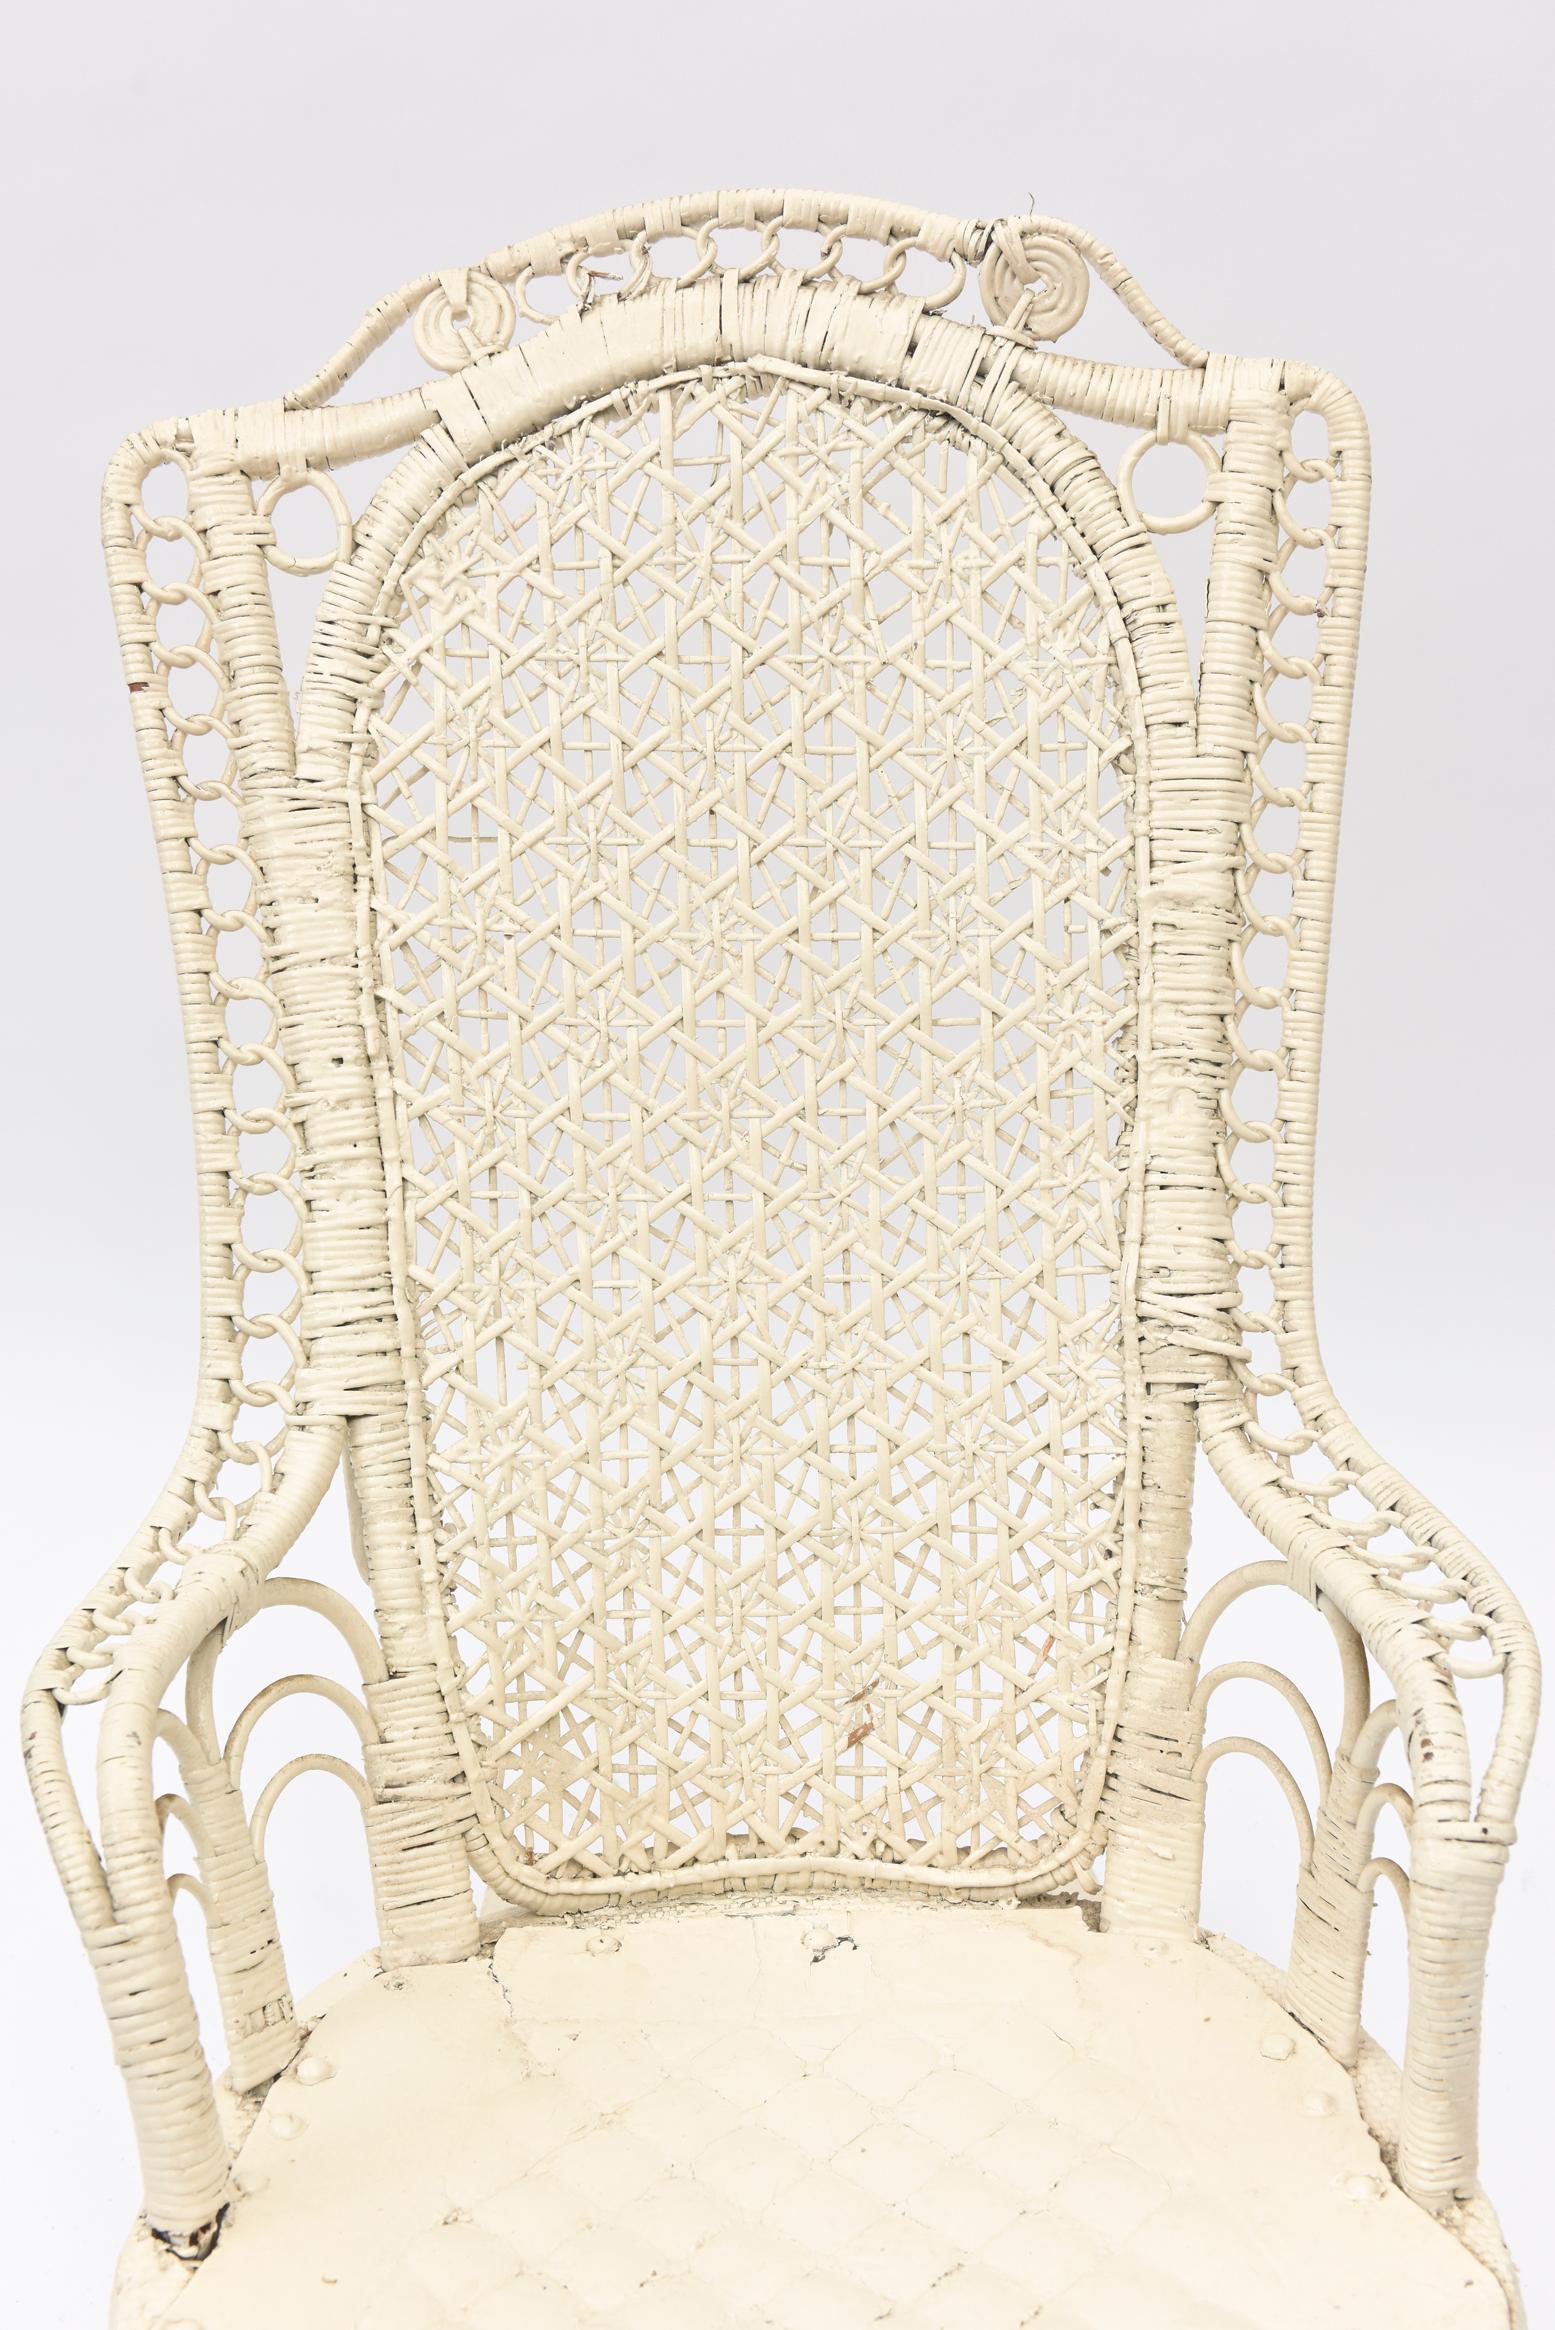 Victorian Wicker Rocker with Interlocking Circle Arms and Spider Woven Back In Fair Condition For Sale In Miami Beach, FL